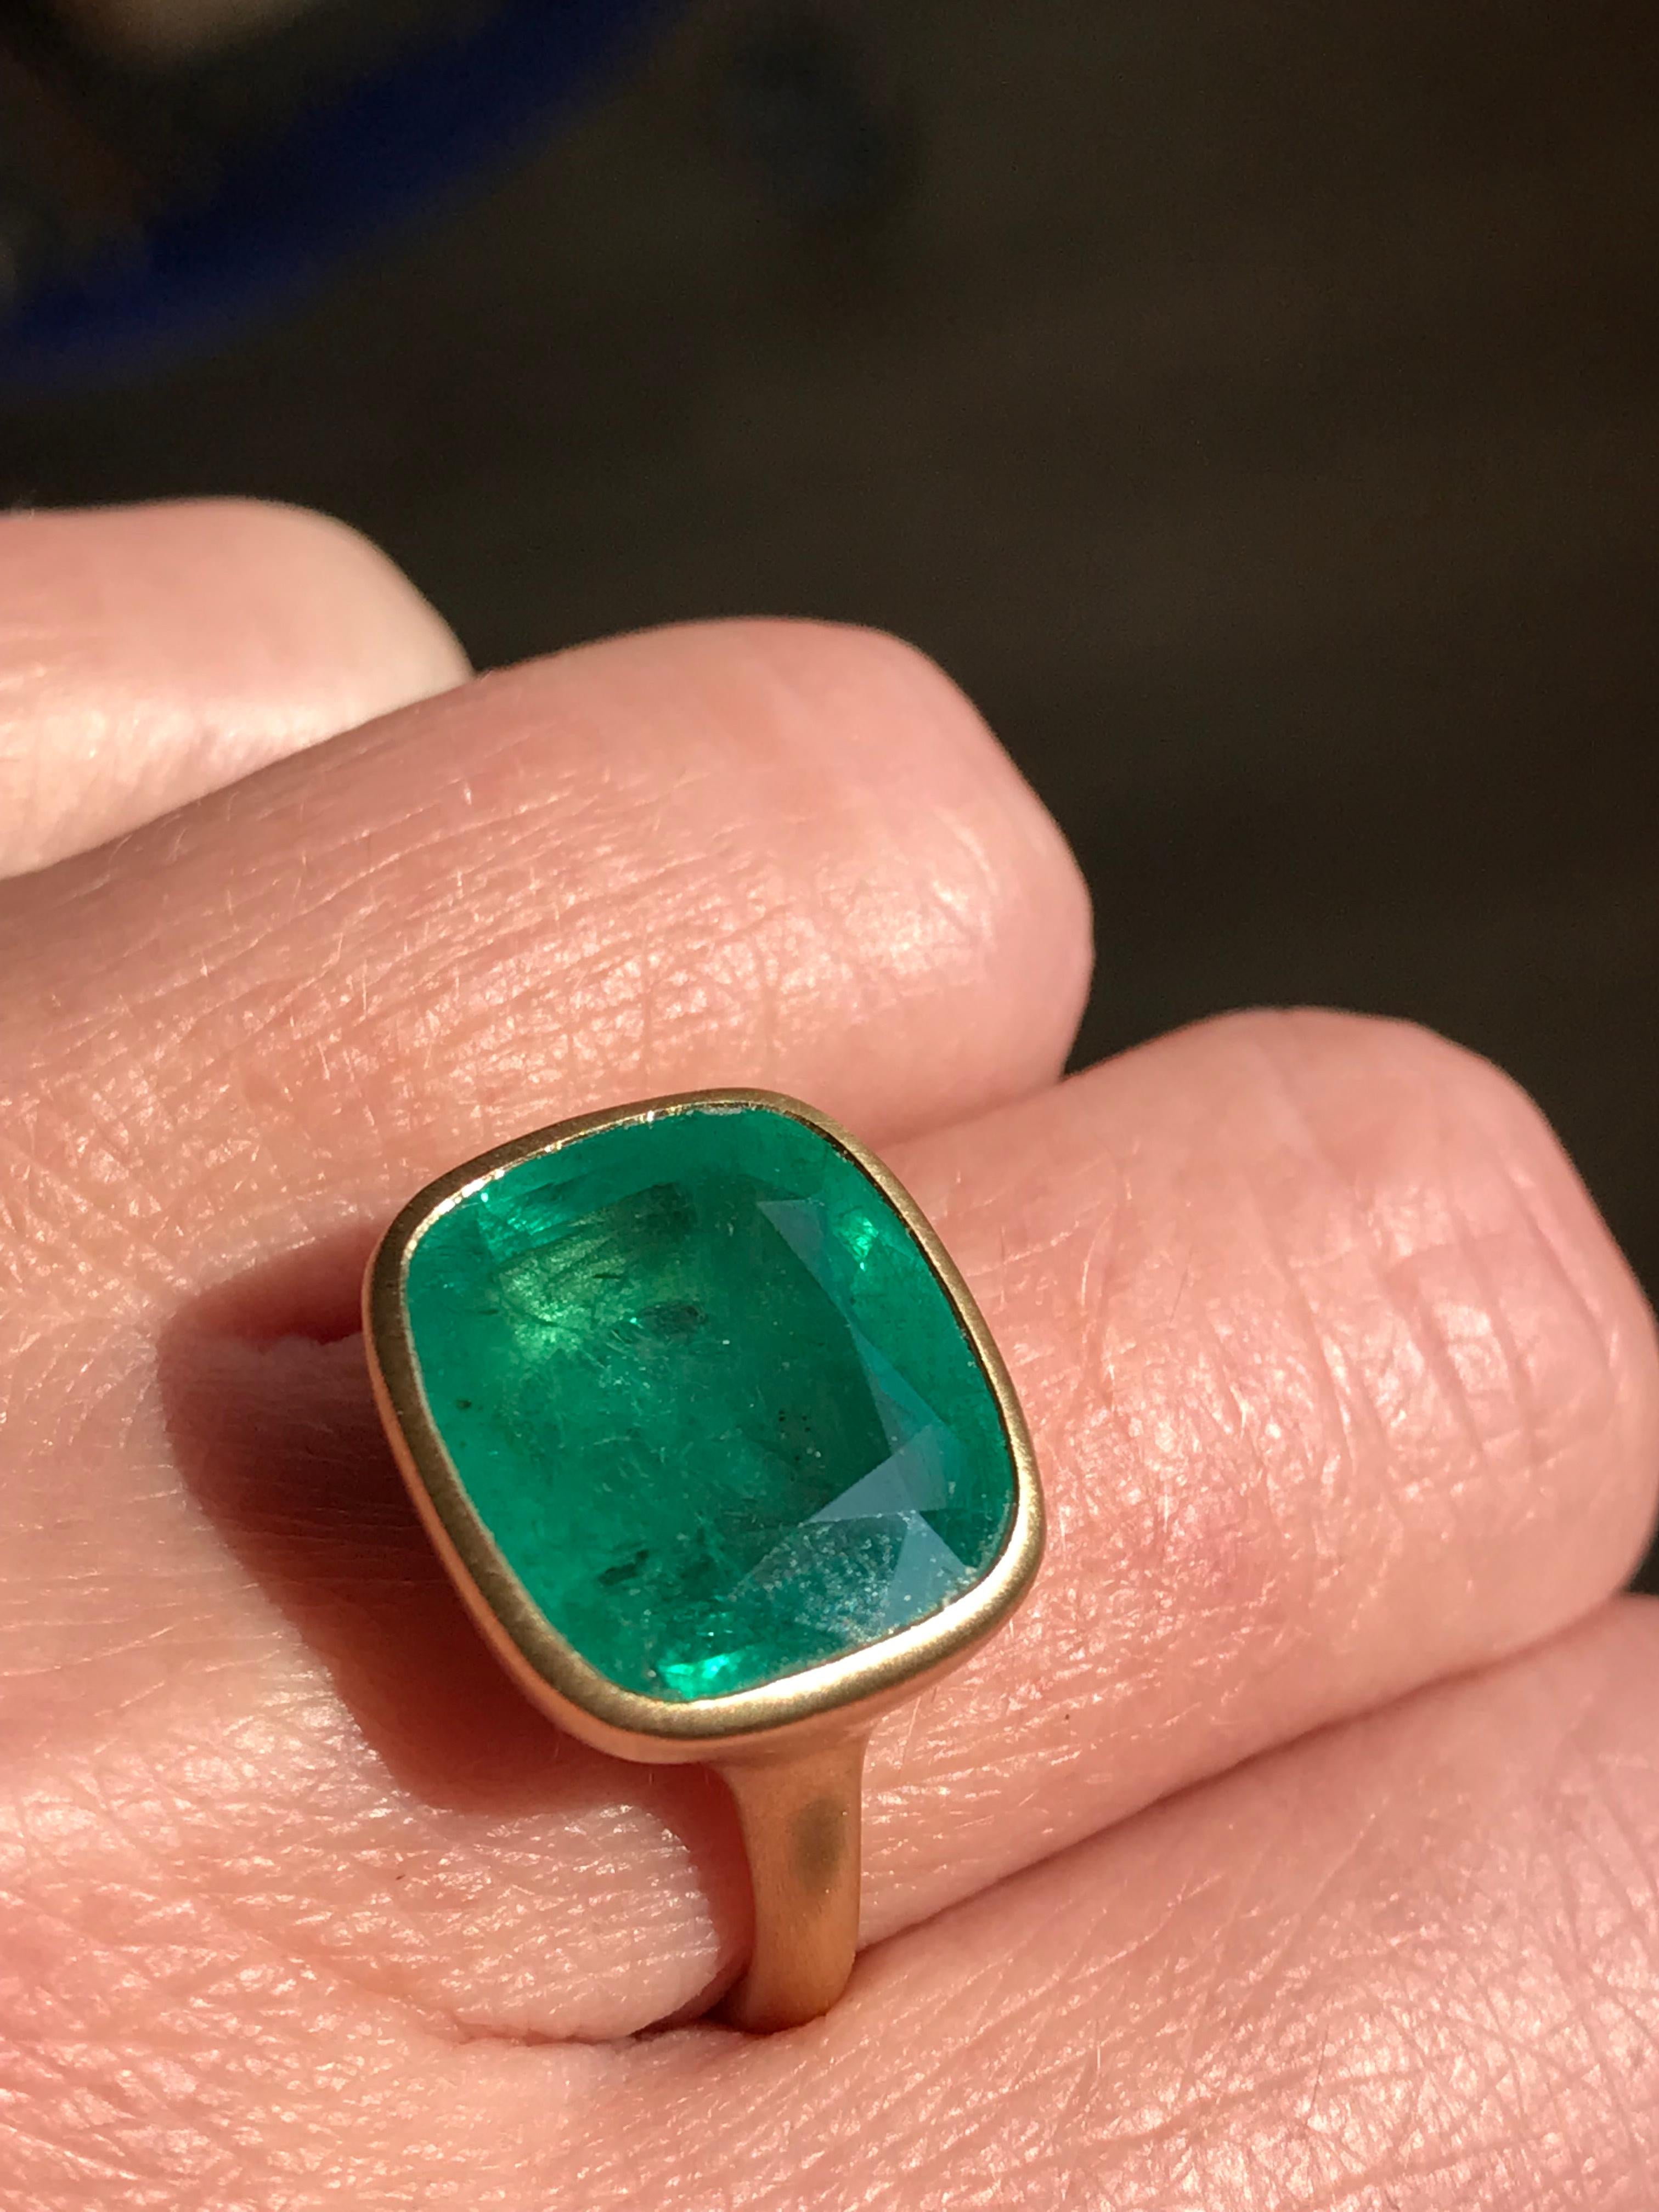 Dalben design One of a Kind 18k yellow gold satin finishing ring with a 9,7 carat bezel-set cushion cut emerald. 
The emerald have natural visible inclusions .
Ring size 7  USA - EU 54 1/2 re-sizable to most finger sizes. 
Bezel stone dimensions